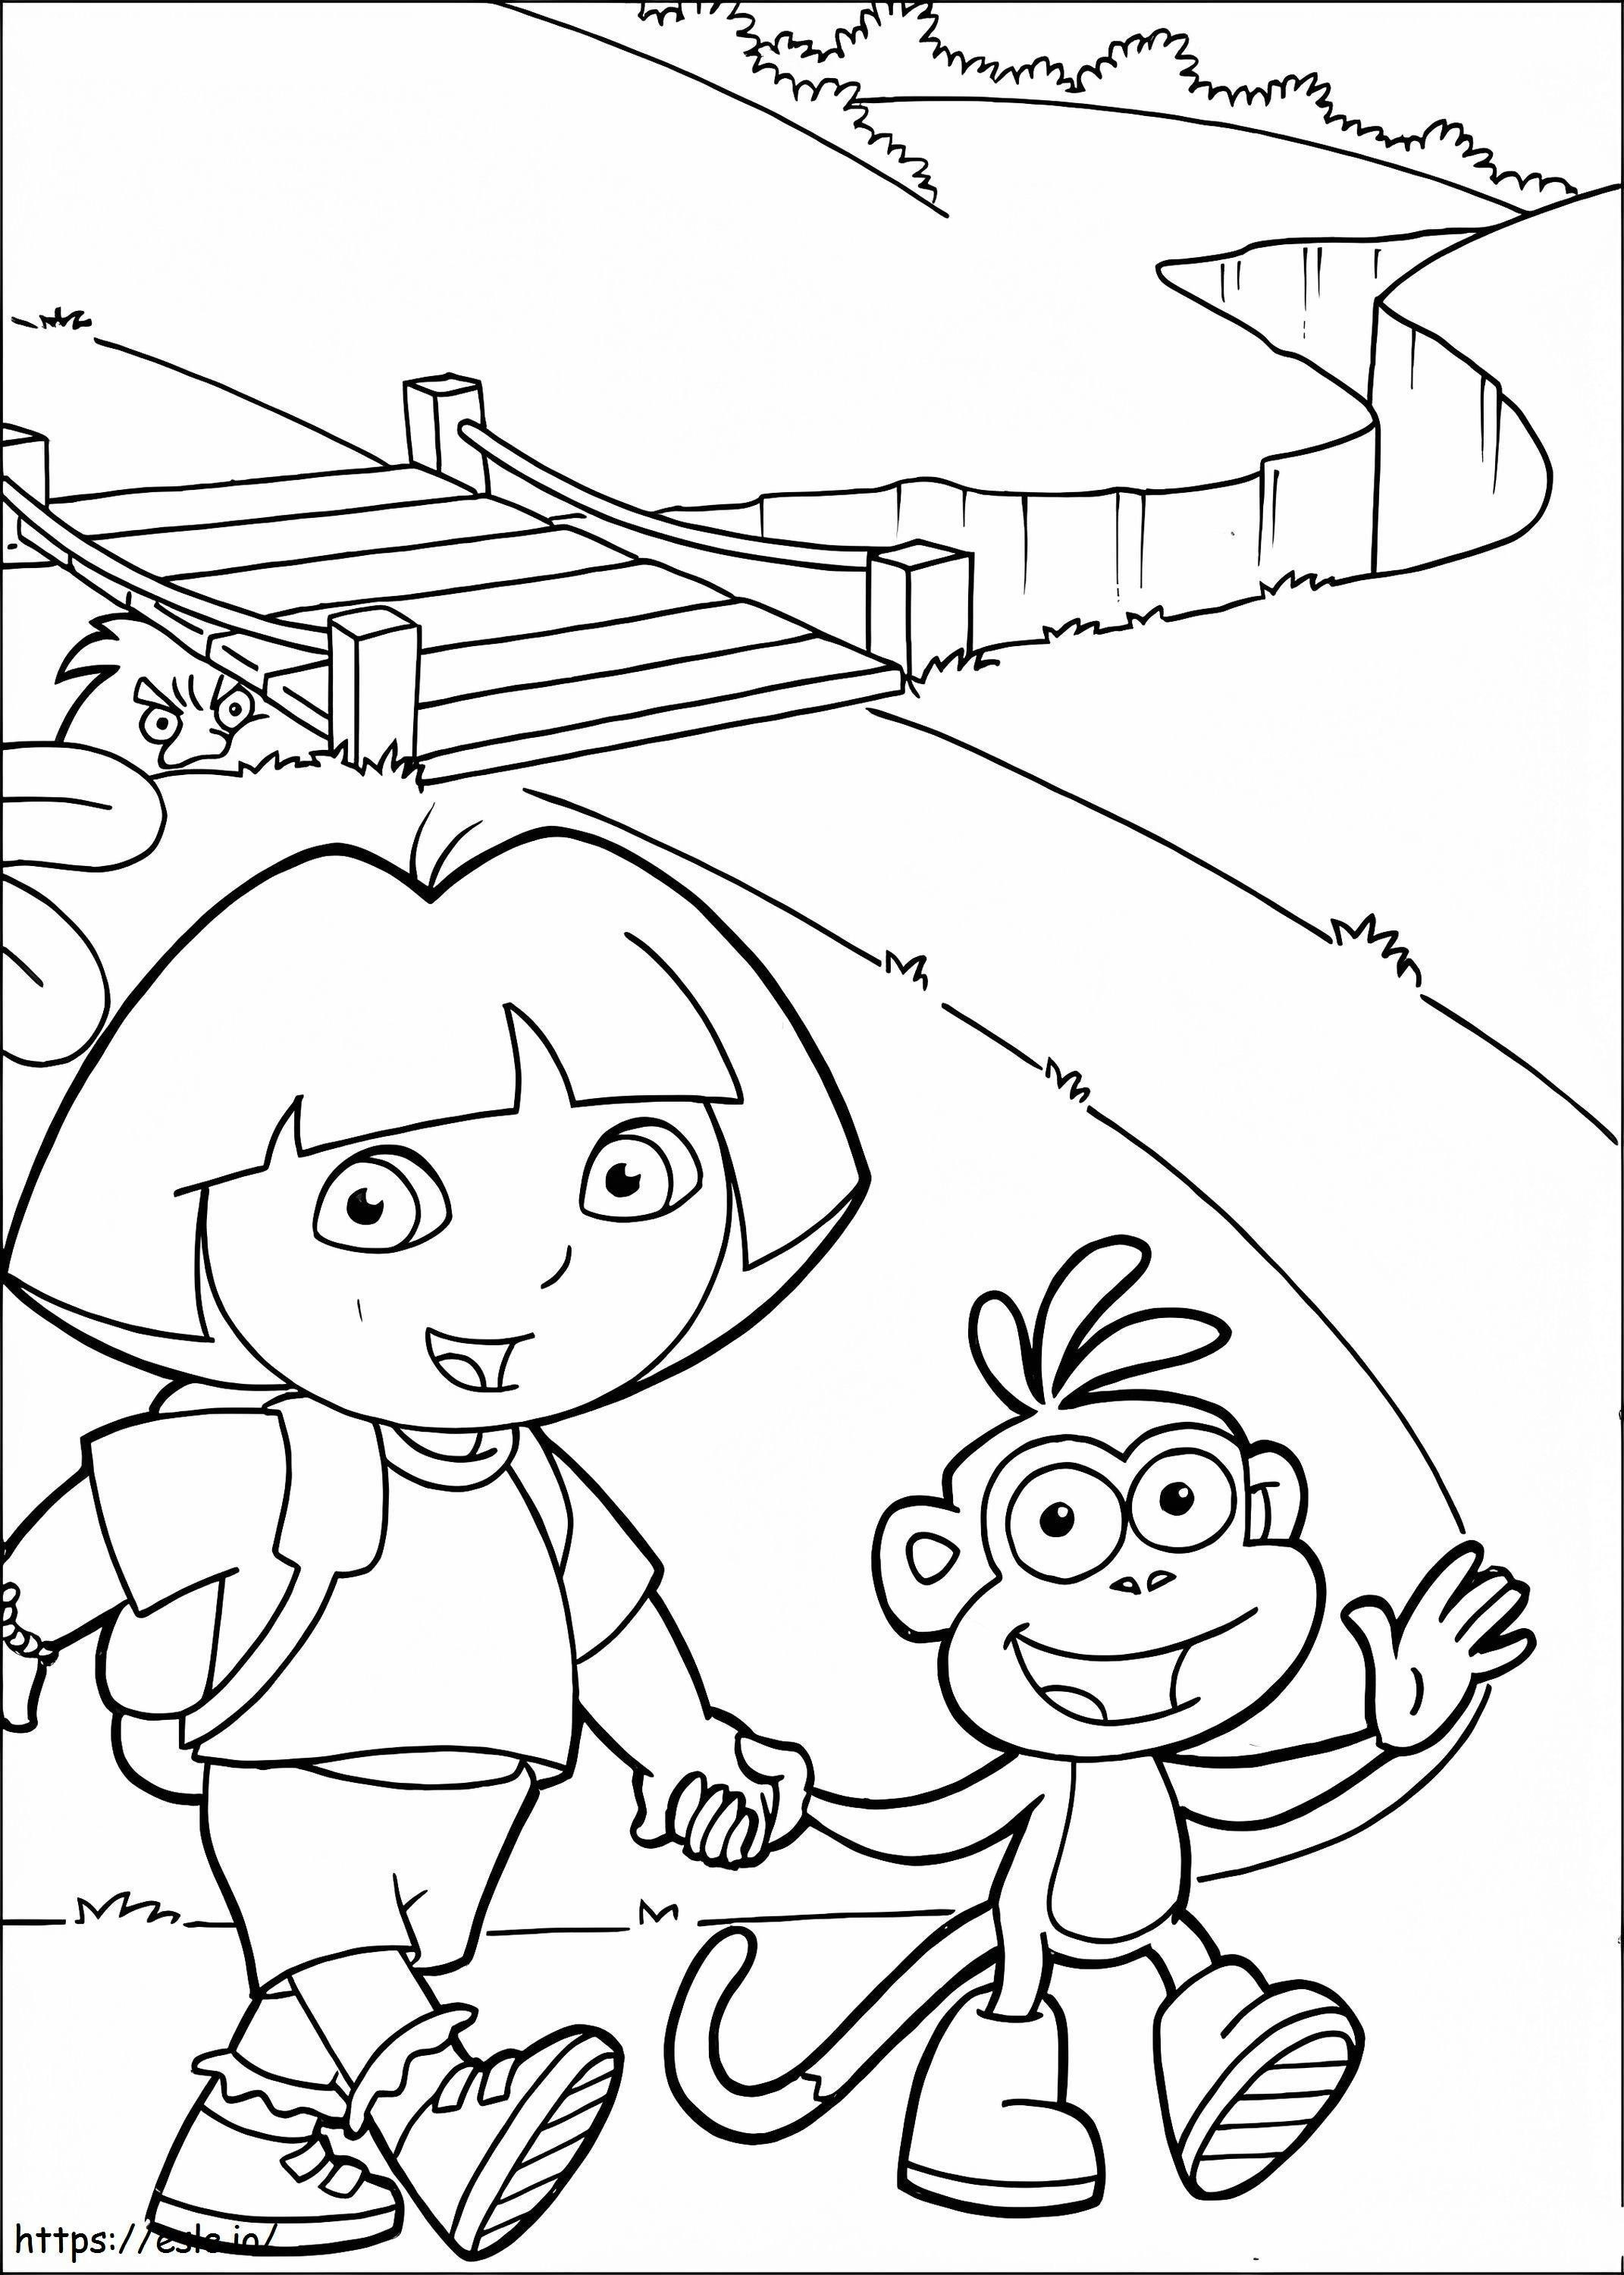 Dora And Boots 2 coloring page